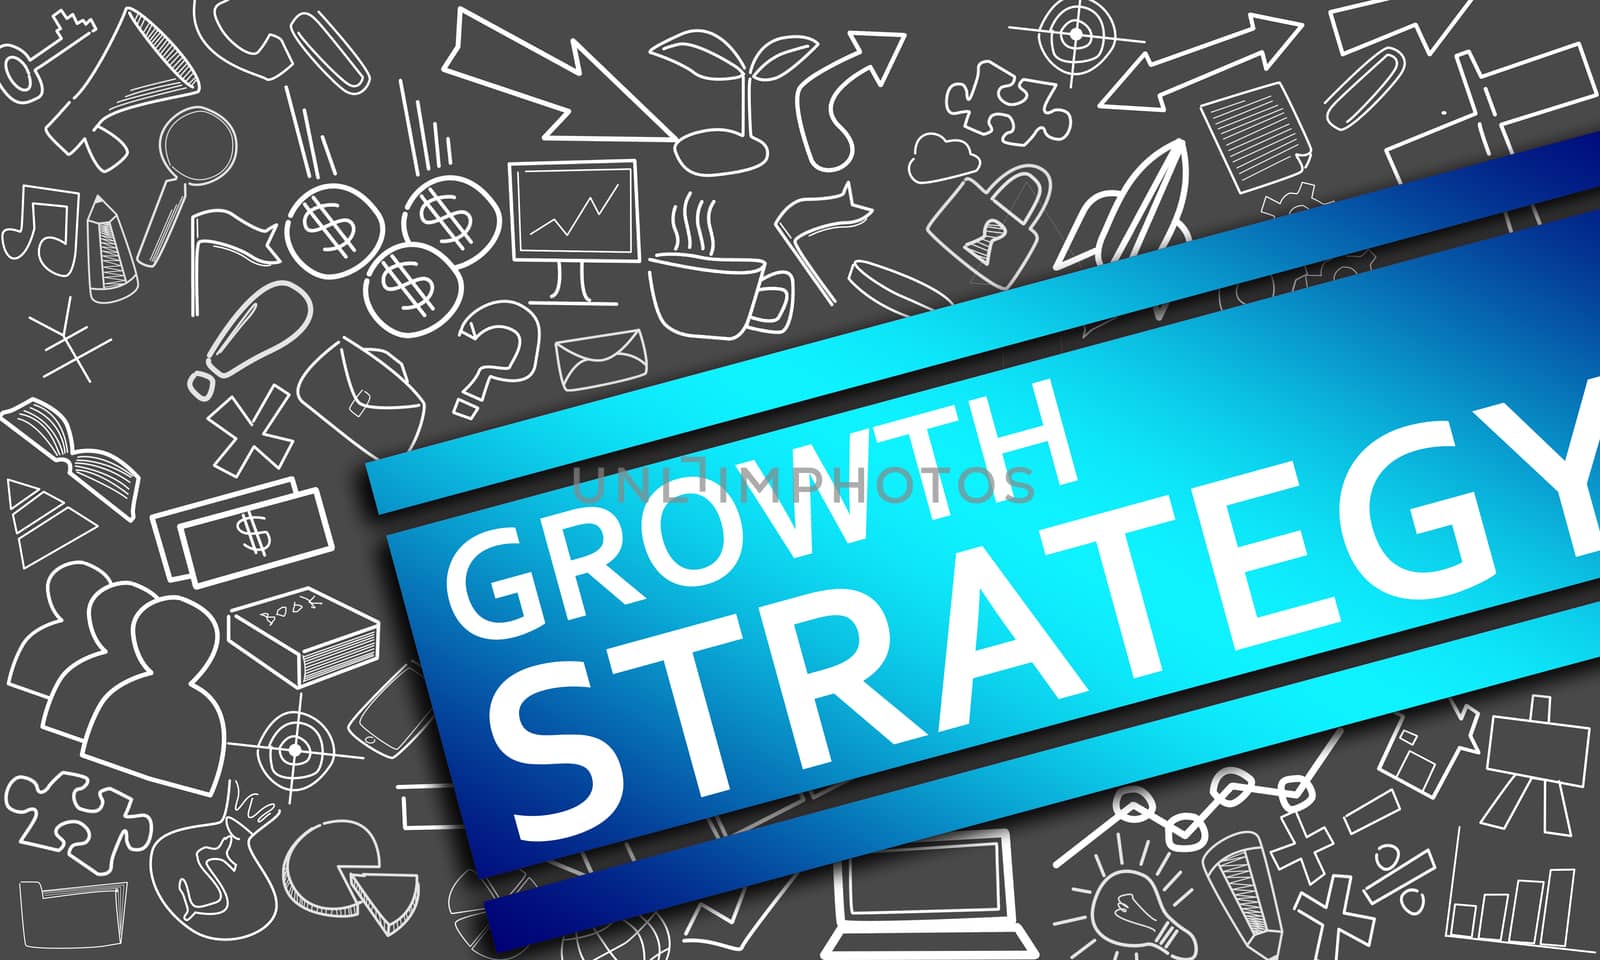 Growth strategy concept with creative icon drawings by tang90246